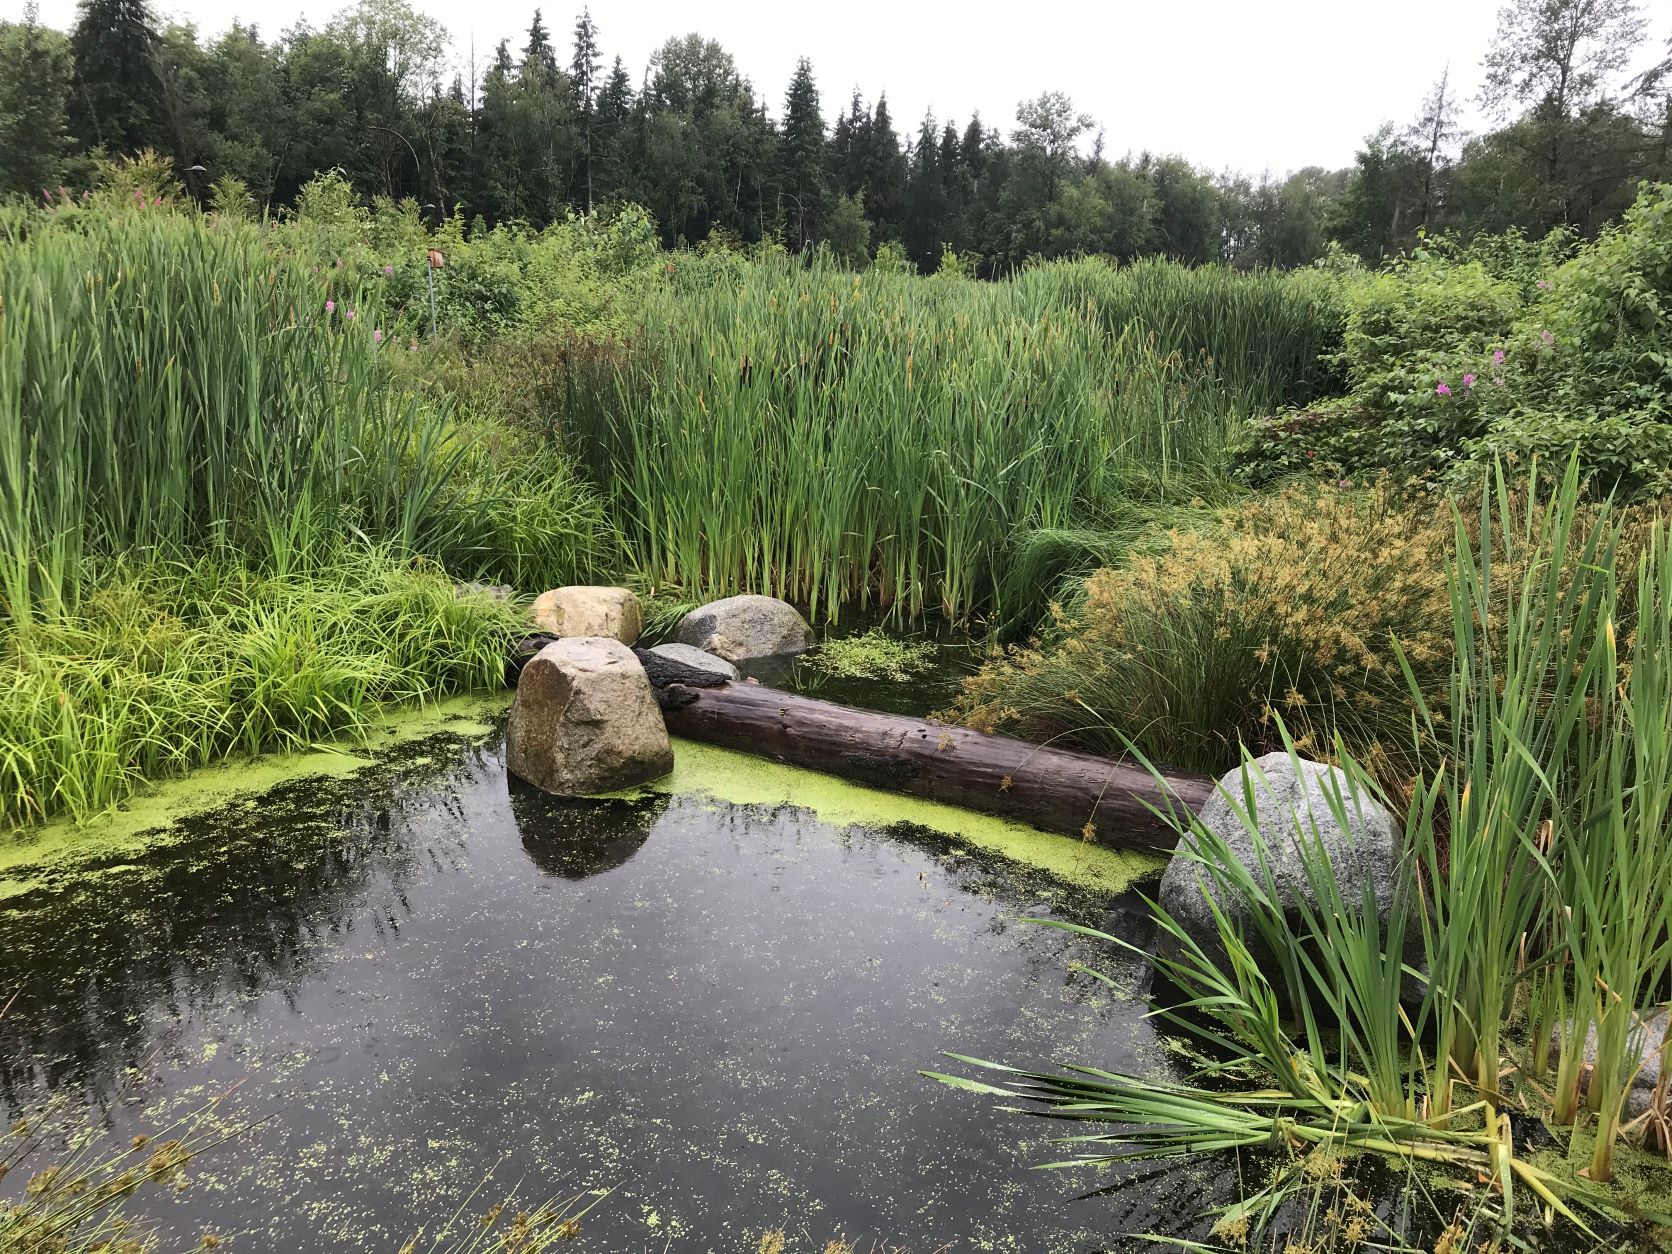 One of Surrey's newer town centre parks, Hawthorne is a mosaic of forest, wetlands, passive grass areas and gardens.